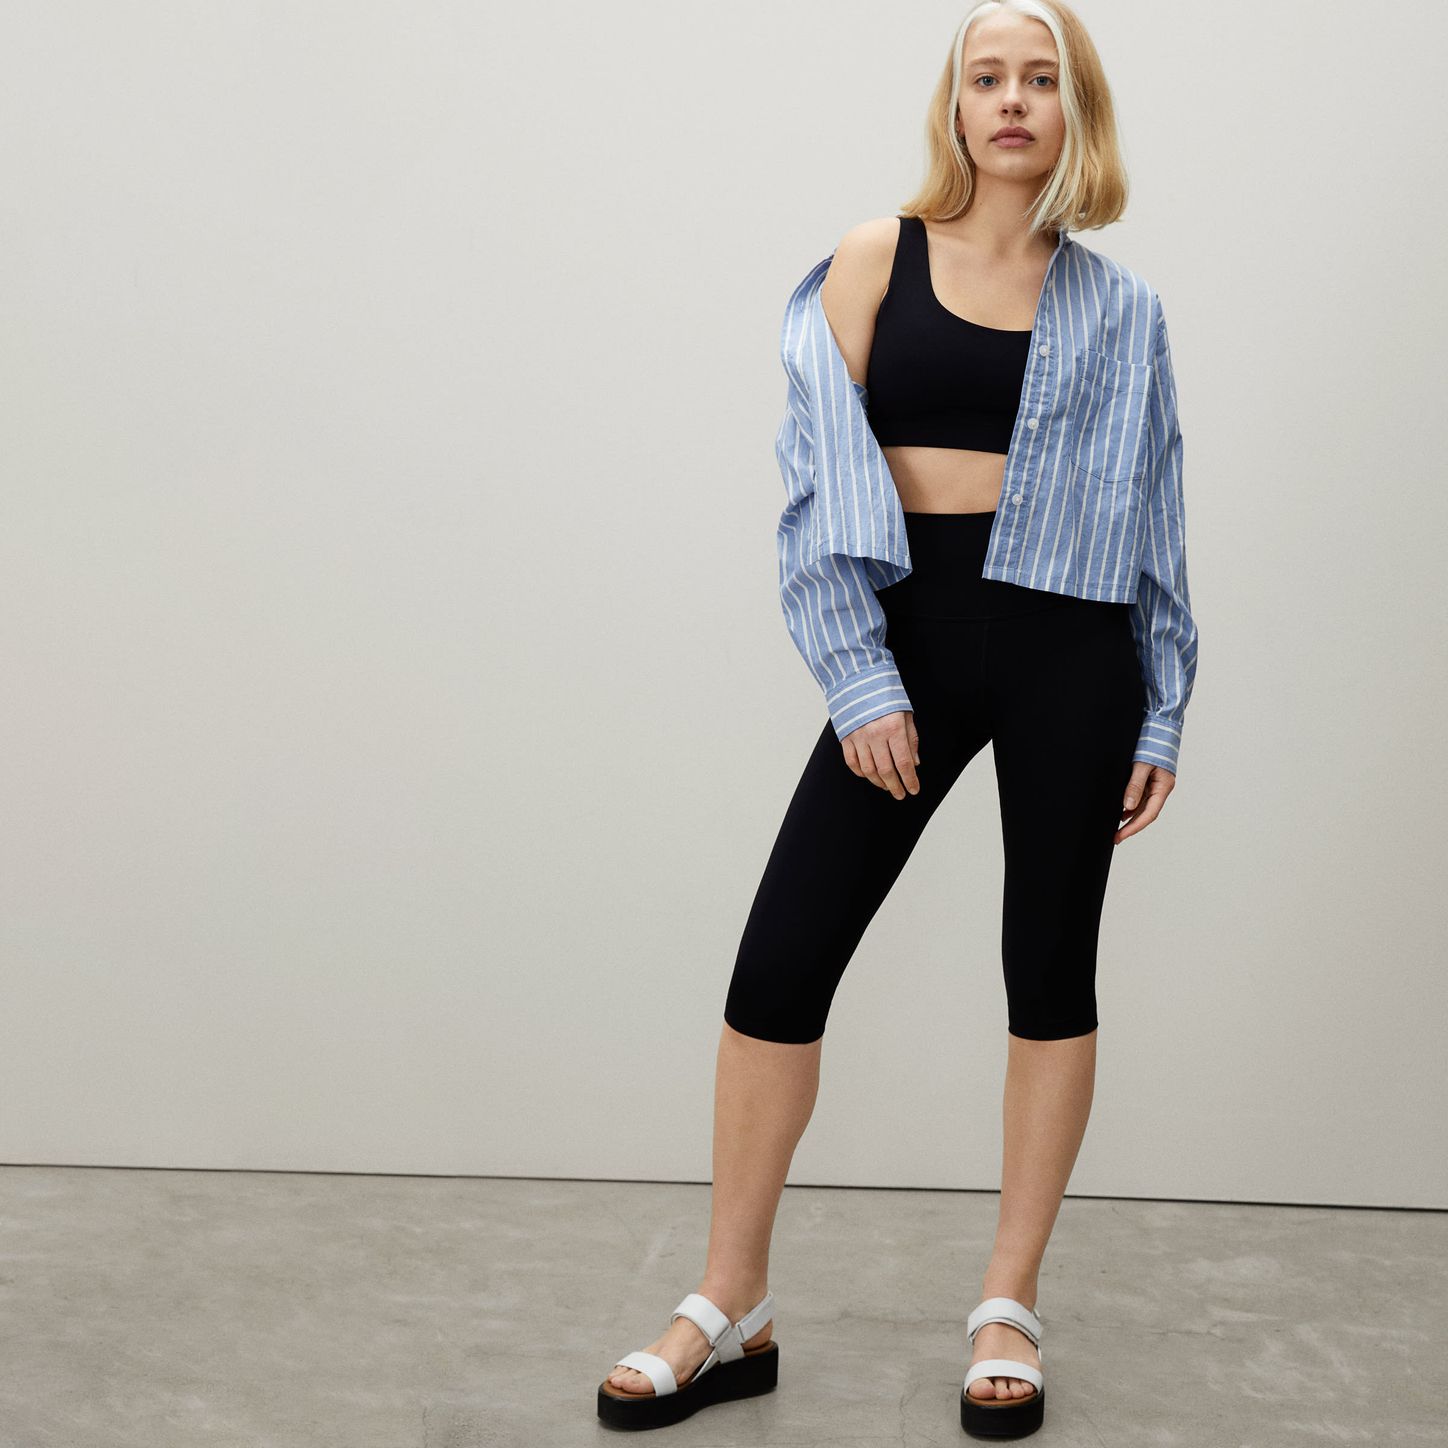 Everlane The Perform Cropped Legging Sale 2021